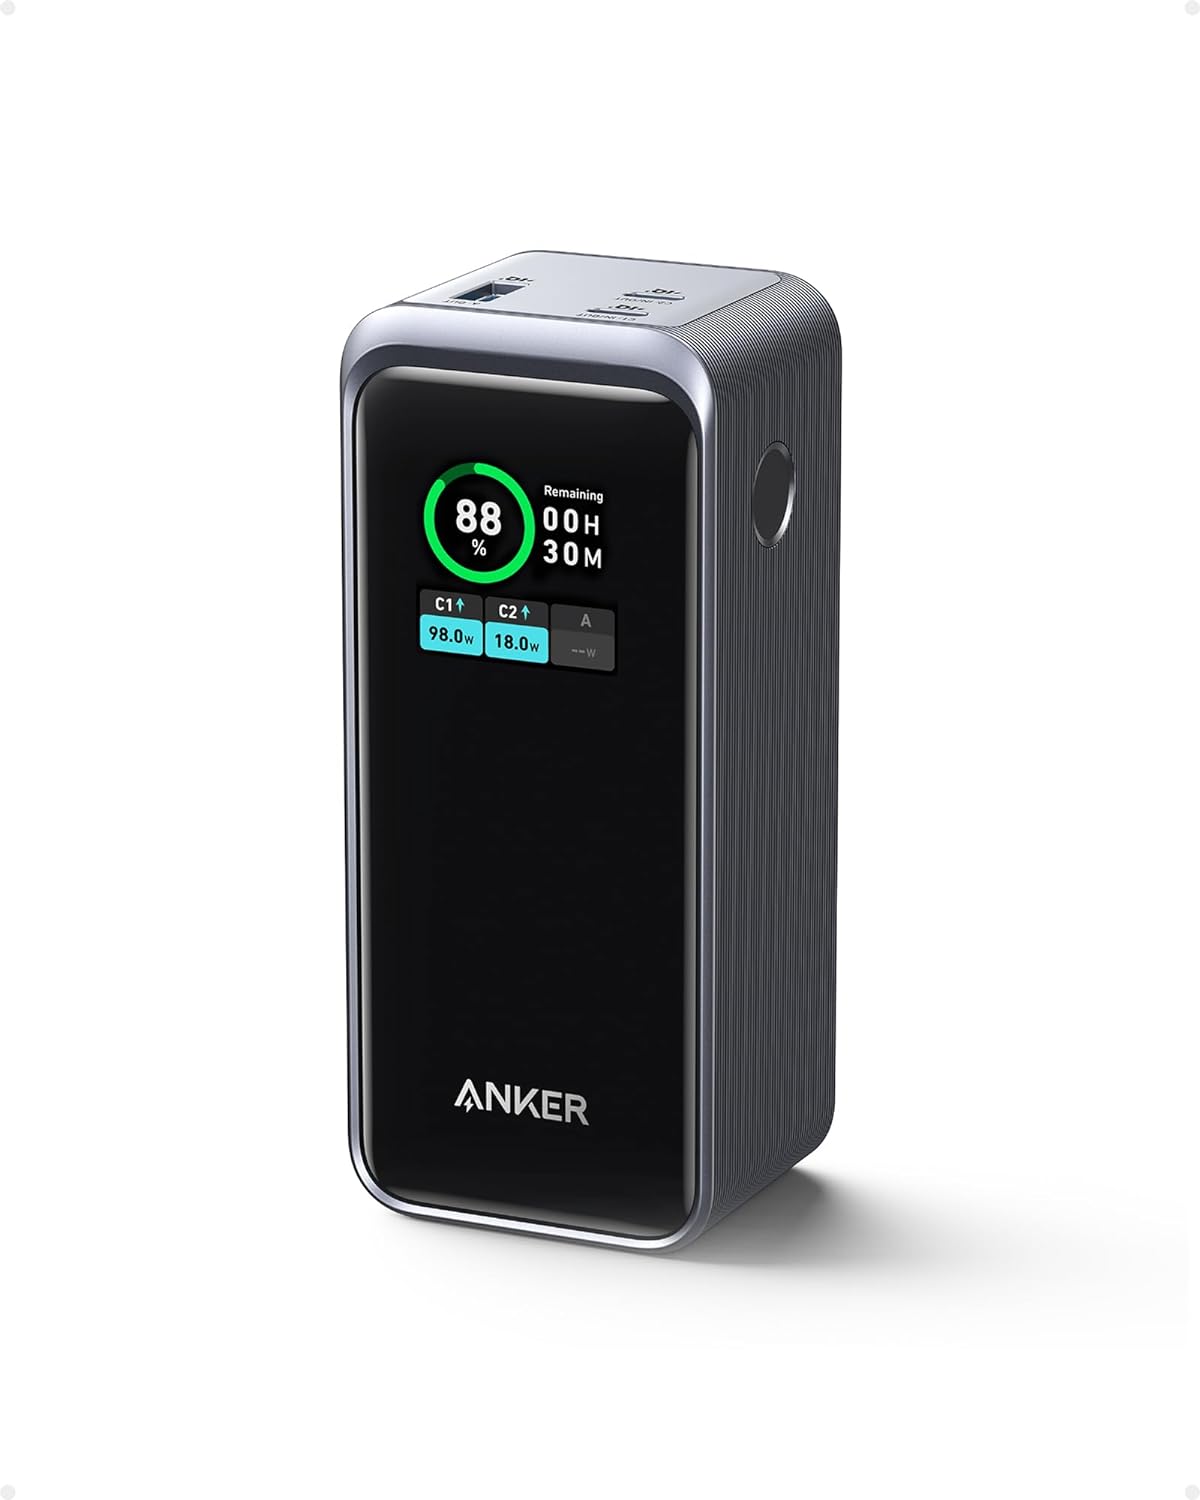 Limited-time deal: Anker Prime Power Bank, 20,000mAh Portable Charger with 200W Output, Smart Digital Display, 2 USB-C and 1 USB-A Port Compatible with iPhone 15/14/13 Se - $89.98